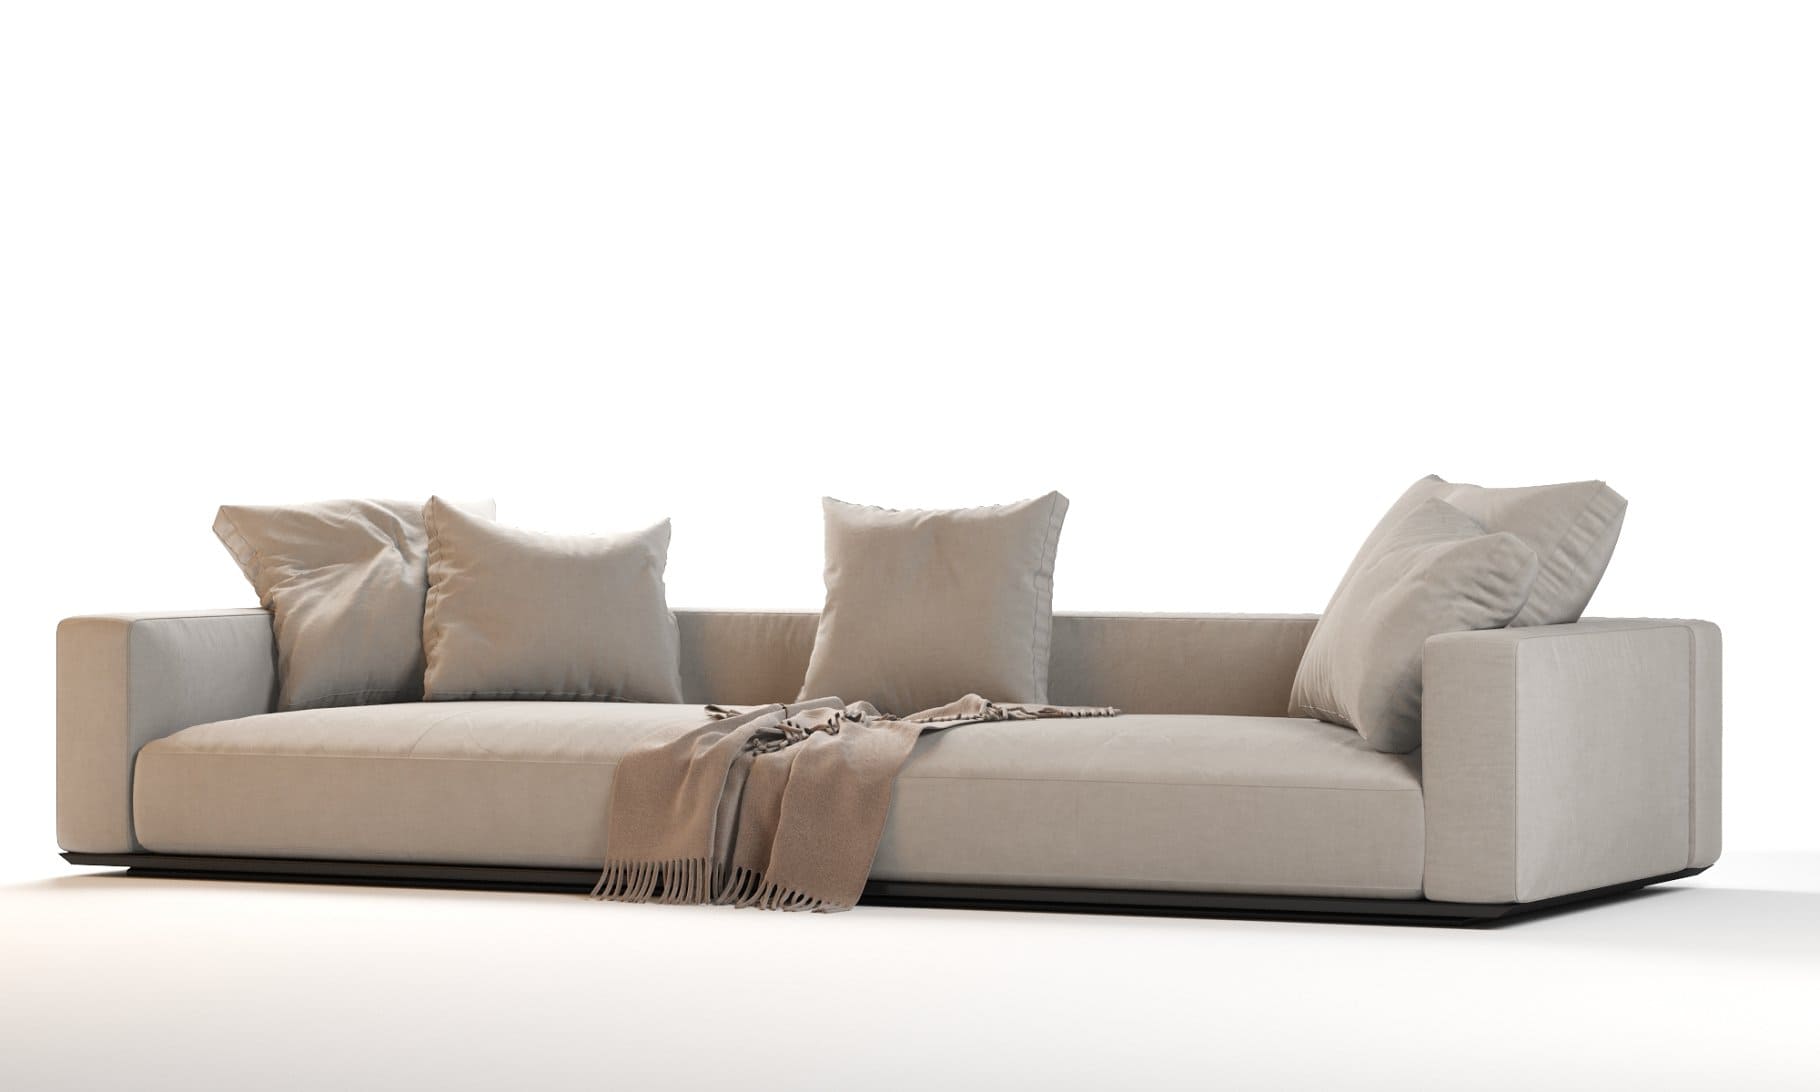 Flexform Grandemare Sectional Sofa with low legs.